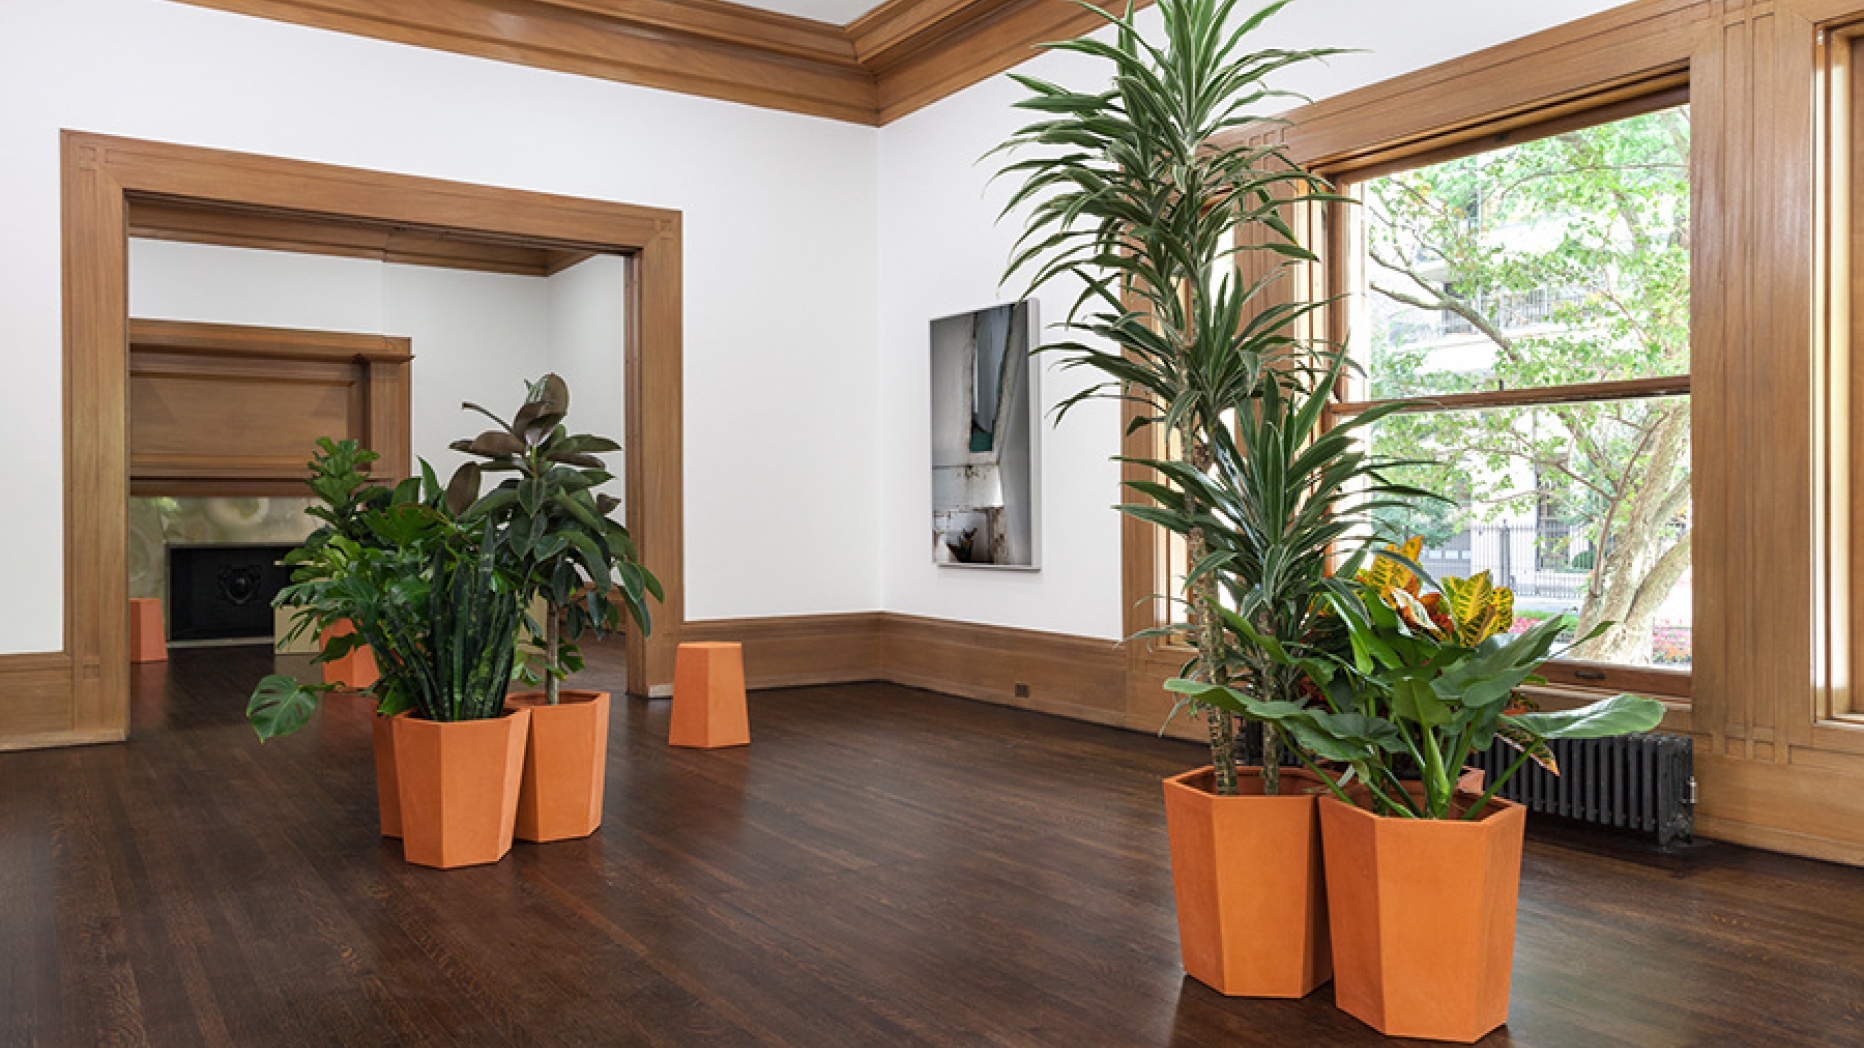 Art installation featuring tropical plants